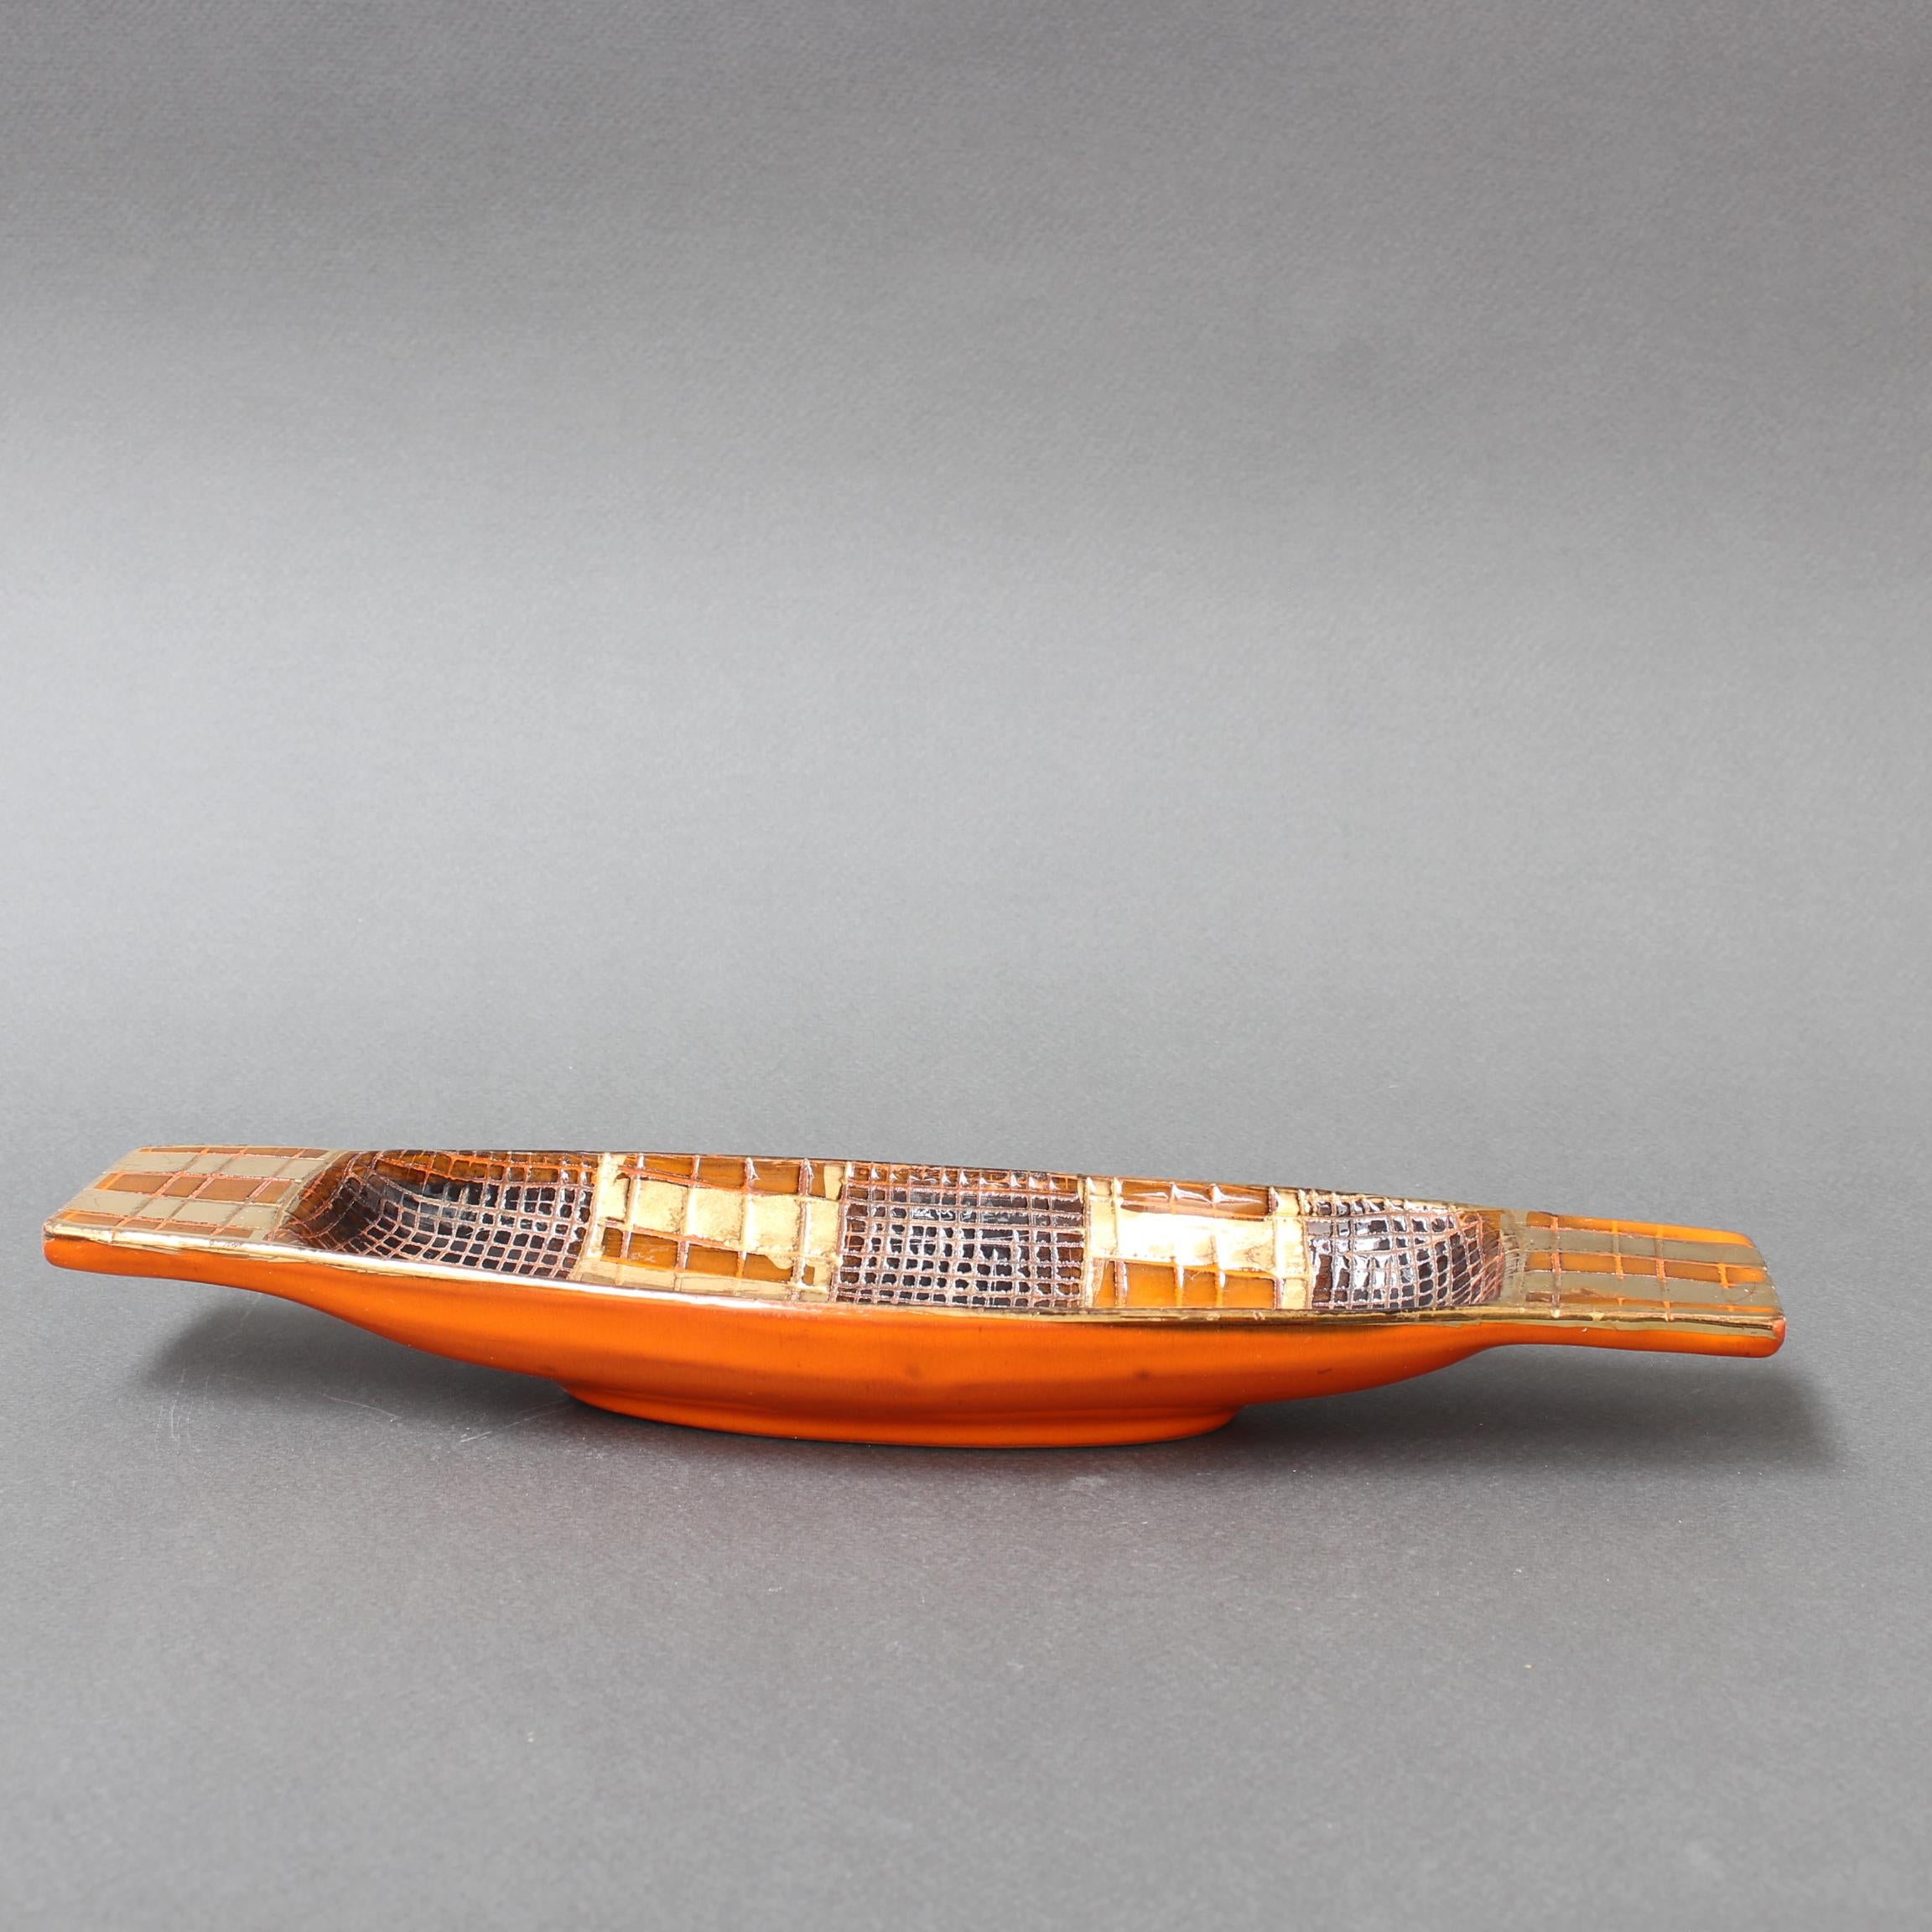 Mid-Century Italian earthenware vide-poche by Aldo Londi for Bitossi (circa 1960s). A rare find, this mid-century ceramic canoe-shaped dish has handles at either end. Above the trademark orange-coloured body is a striking motif of small enamelled